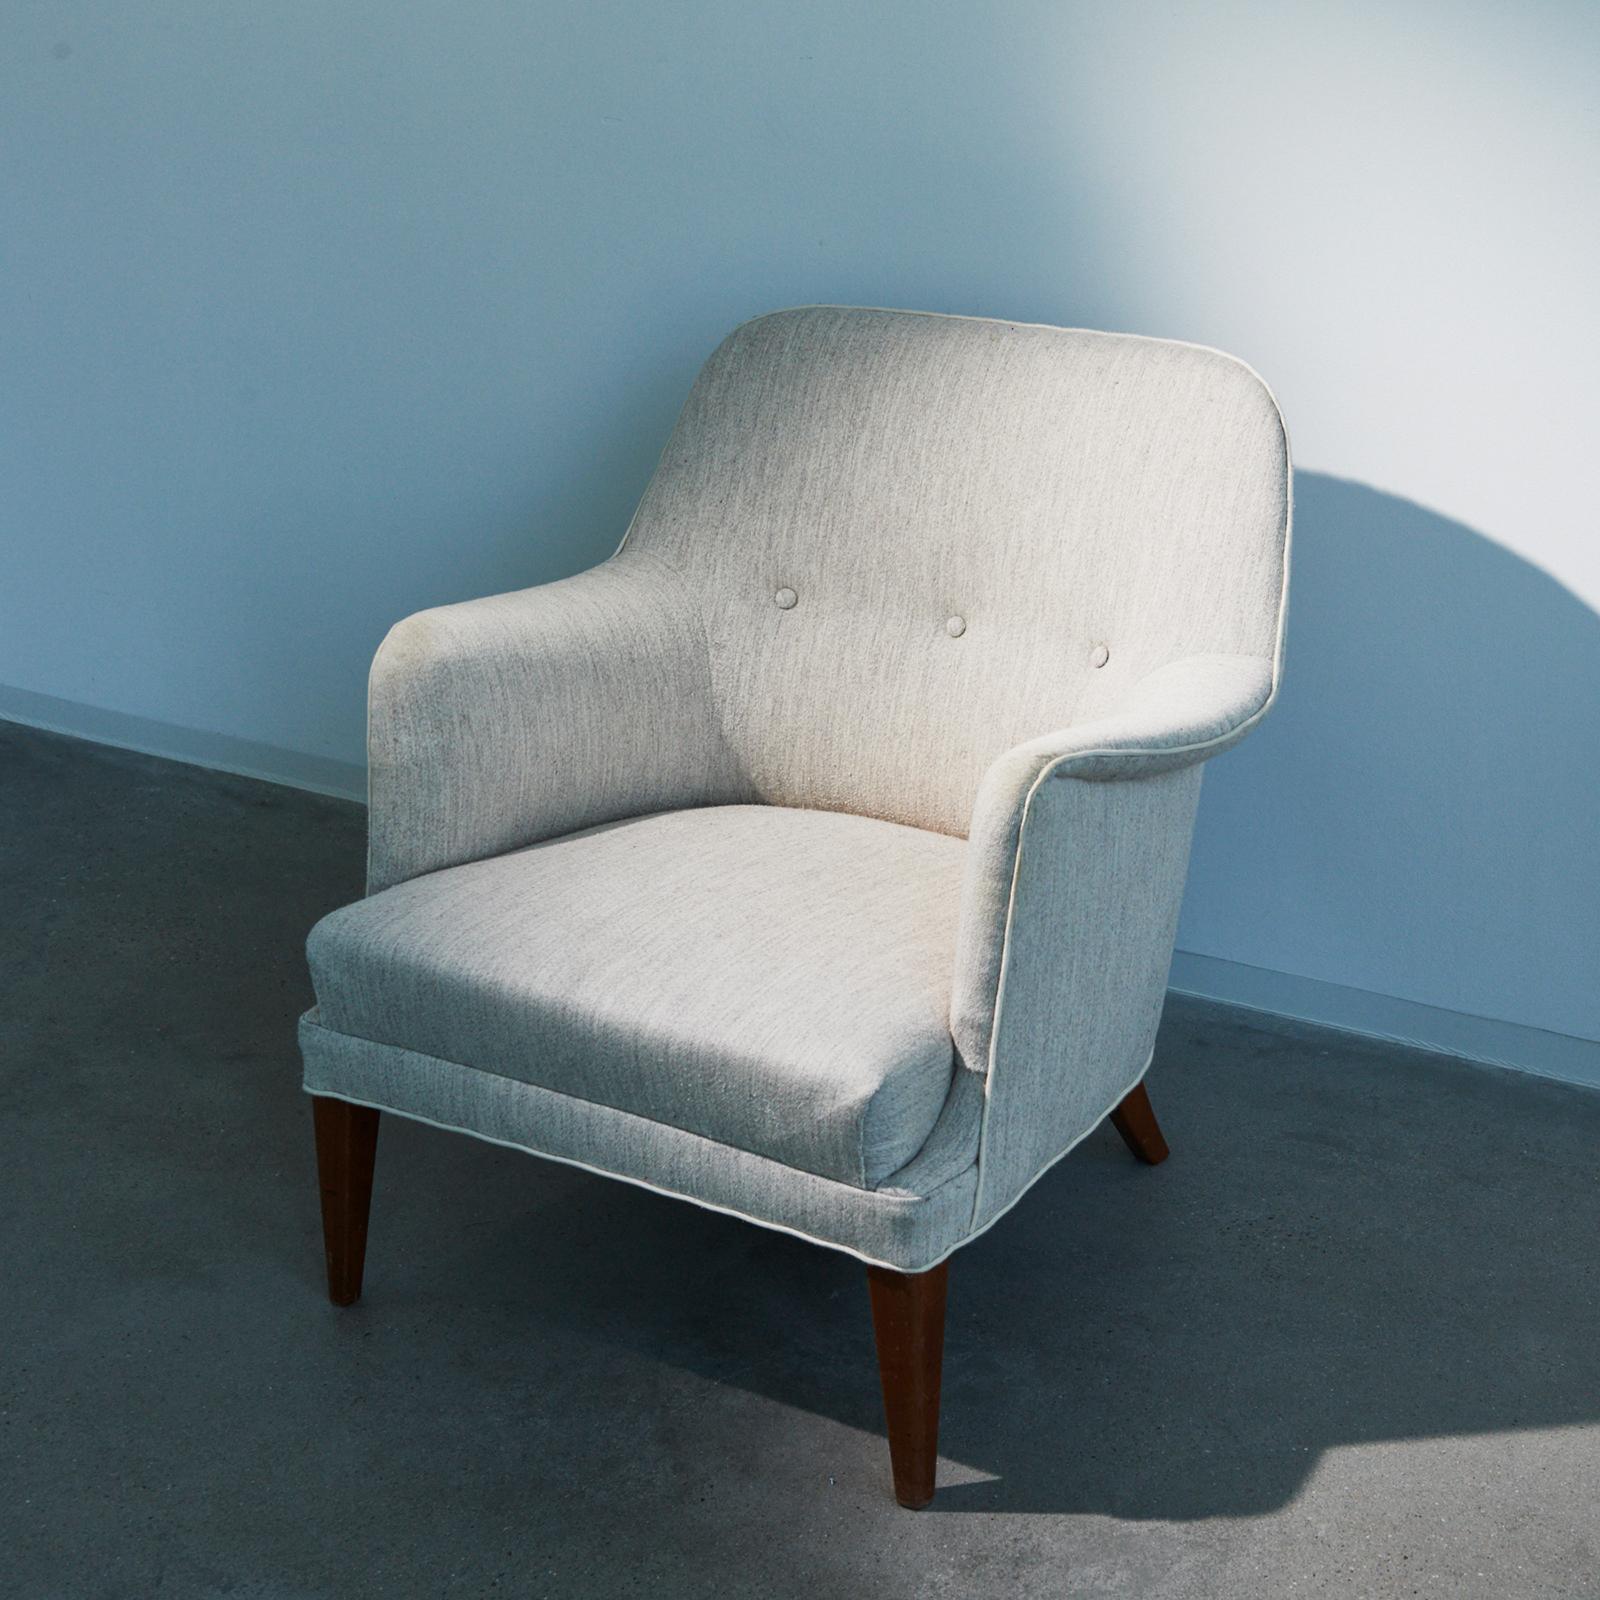 Danish furniture design: Easy chair upholstered in light wool, stained beech legs. 1950s.
Minor wear due to age and use. Marks and scratches on legs.